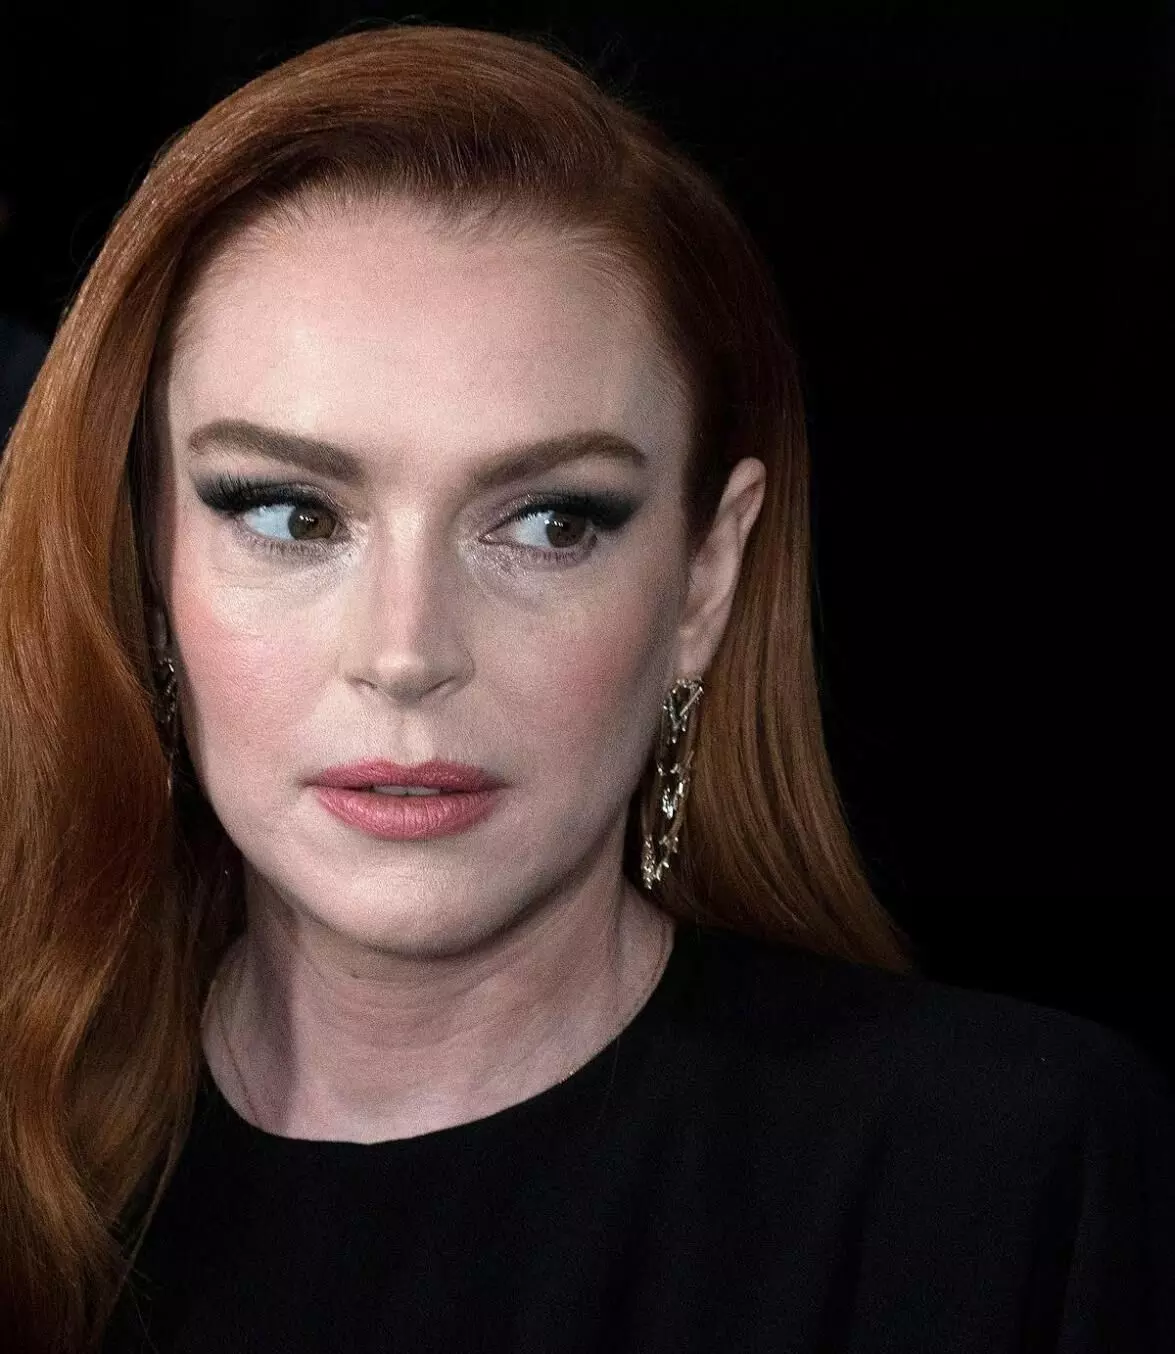 Netflix movie ‘Our Little Secret to be headlined by Lindsay Lohan